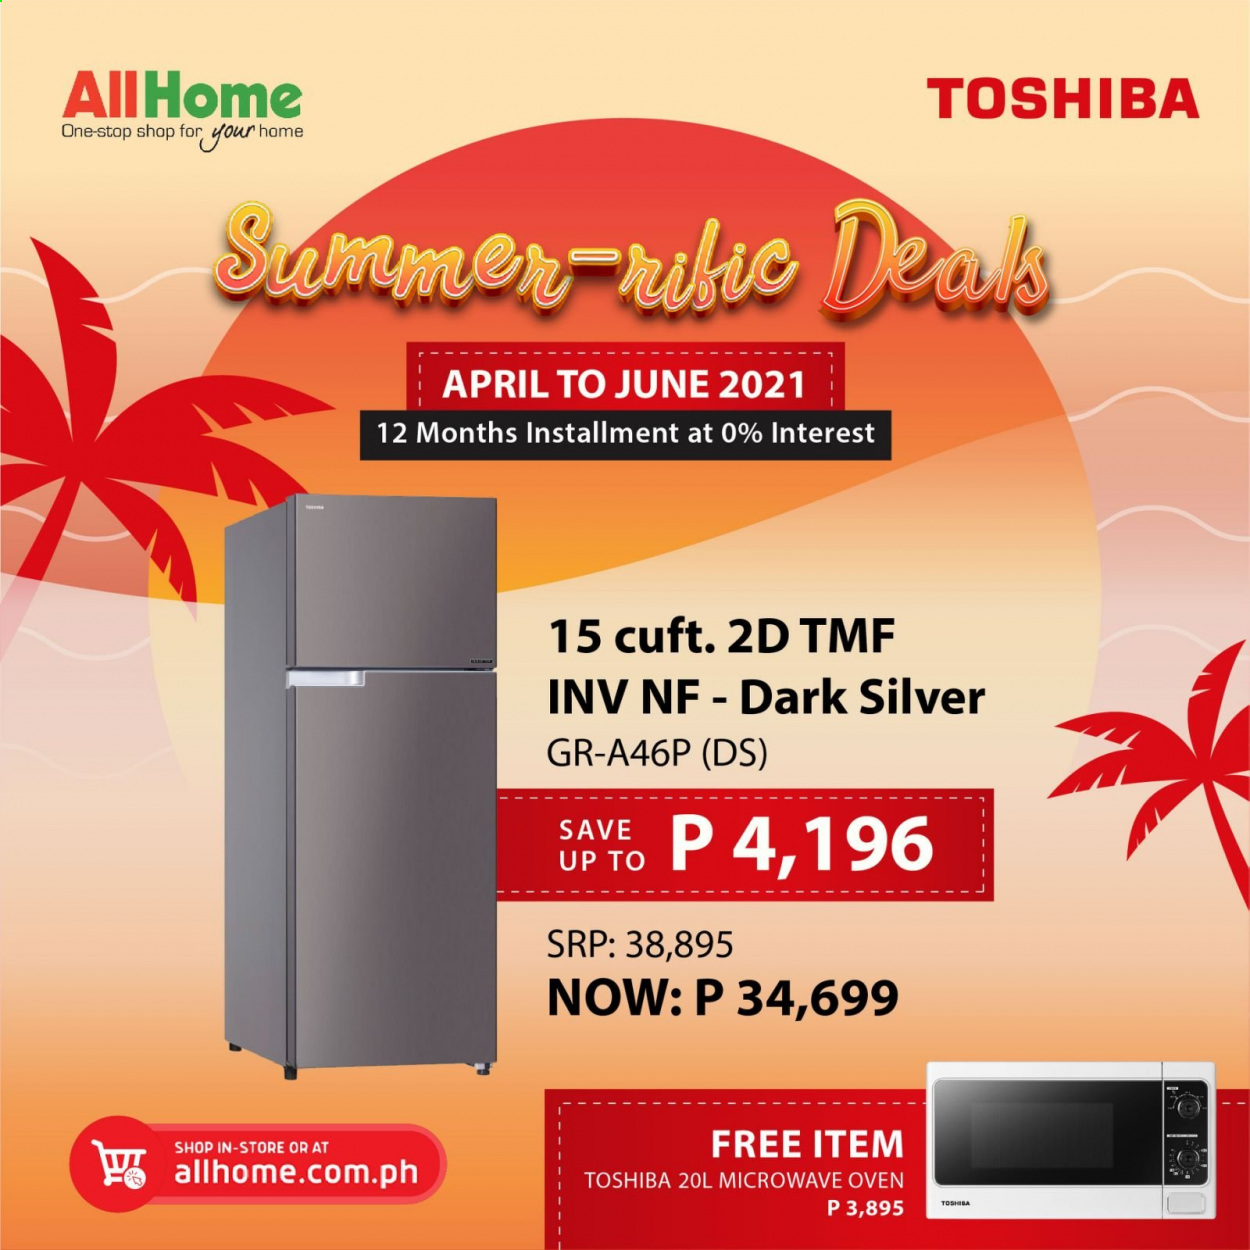 thumbnail - AllHome offer  - Sales products - Toshiba, oven, microwave. Page 3.